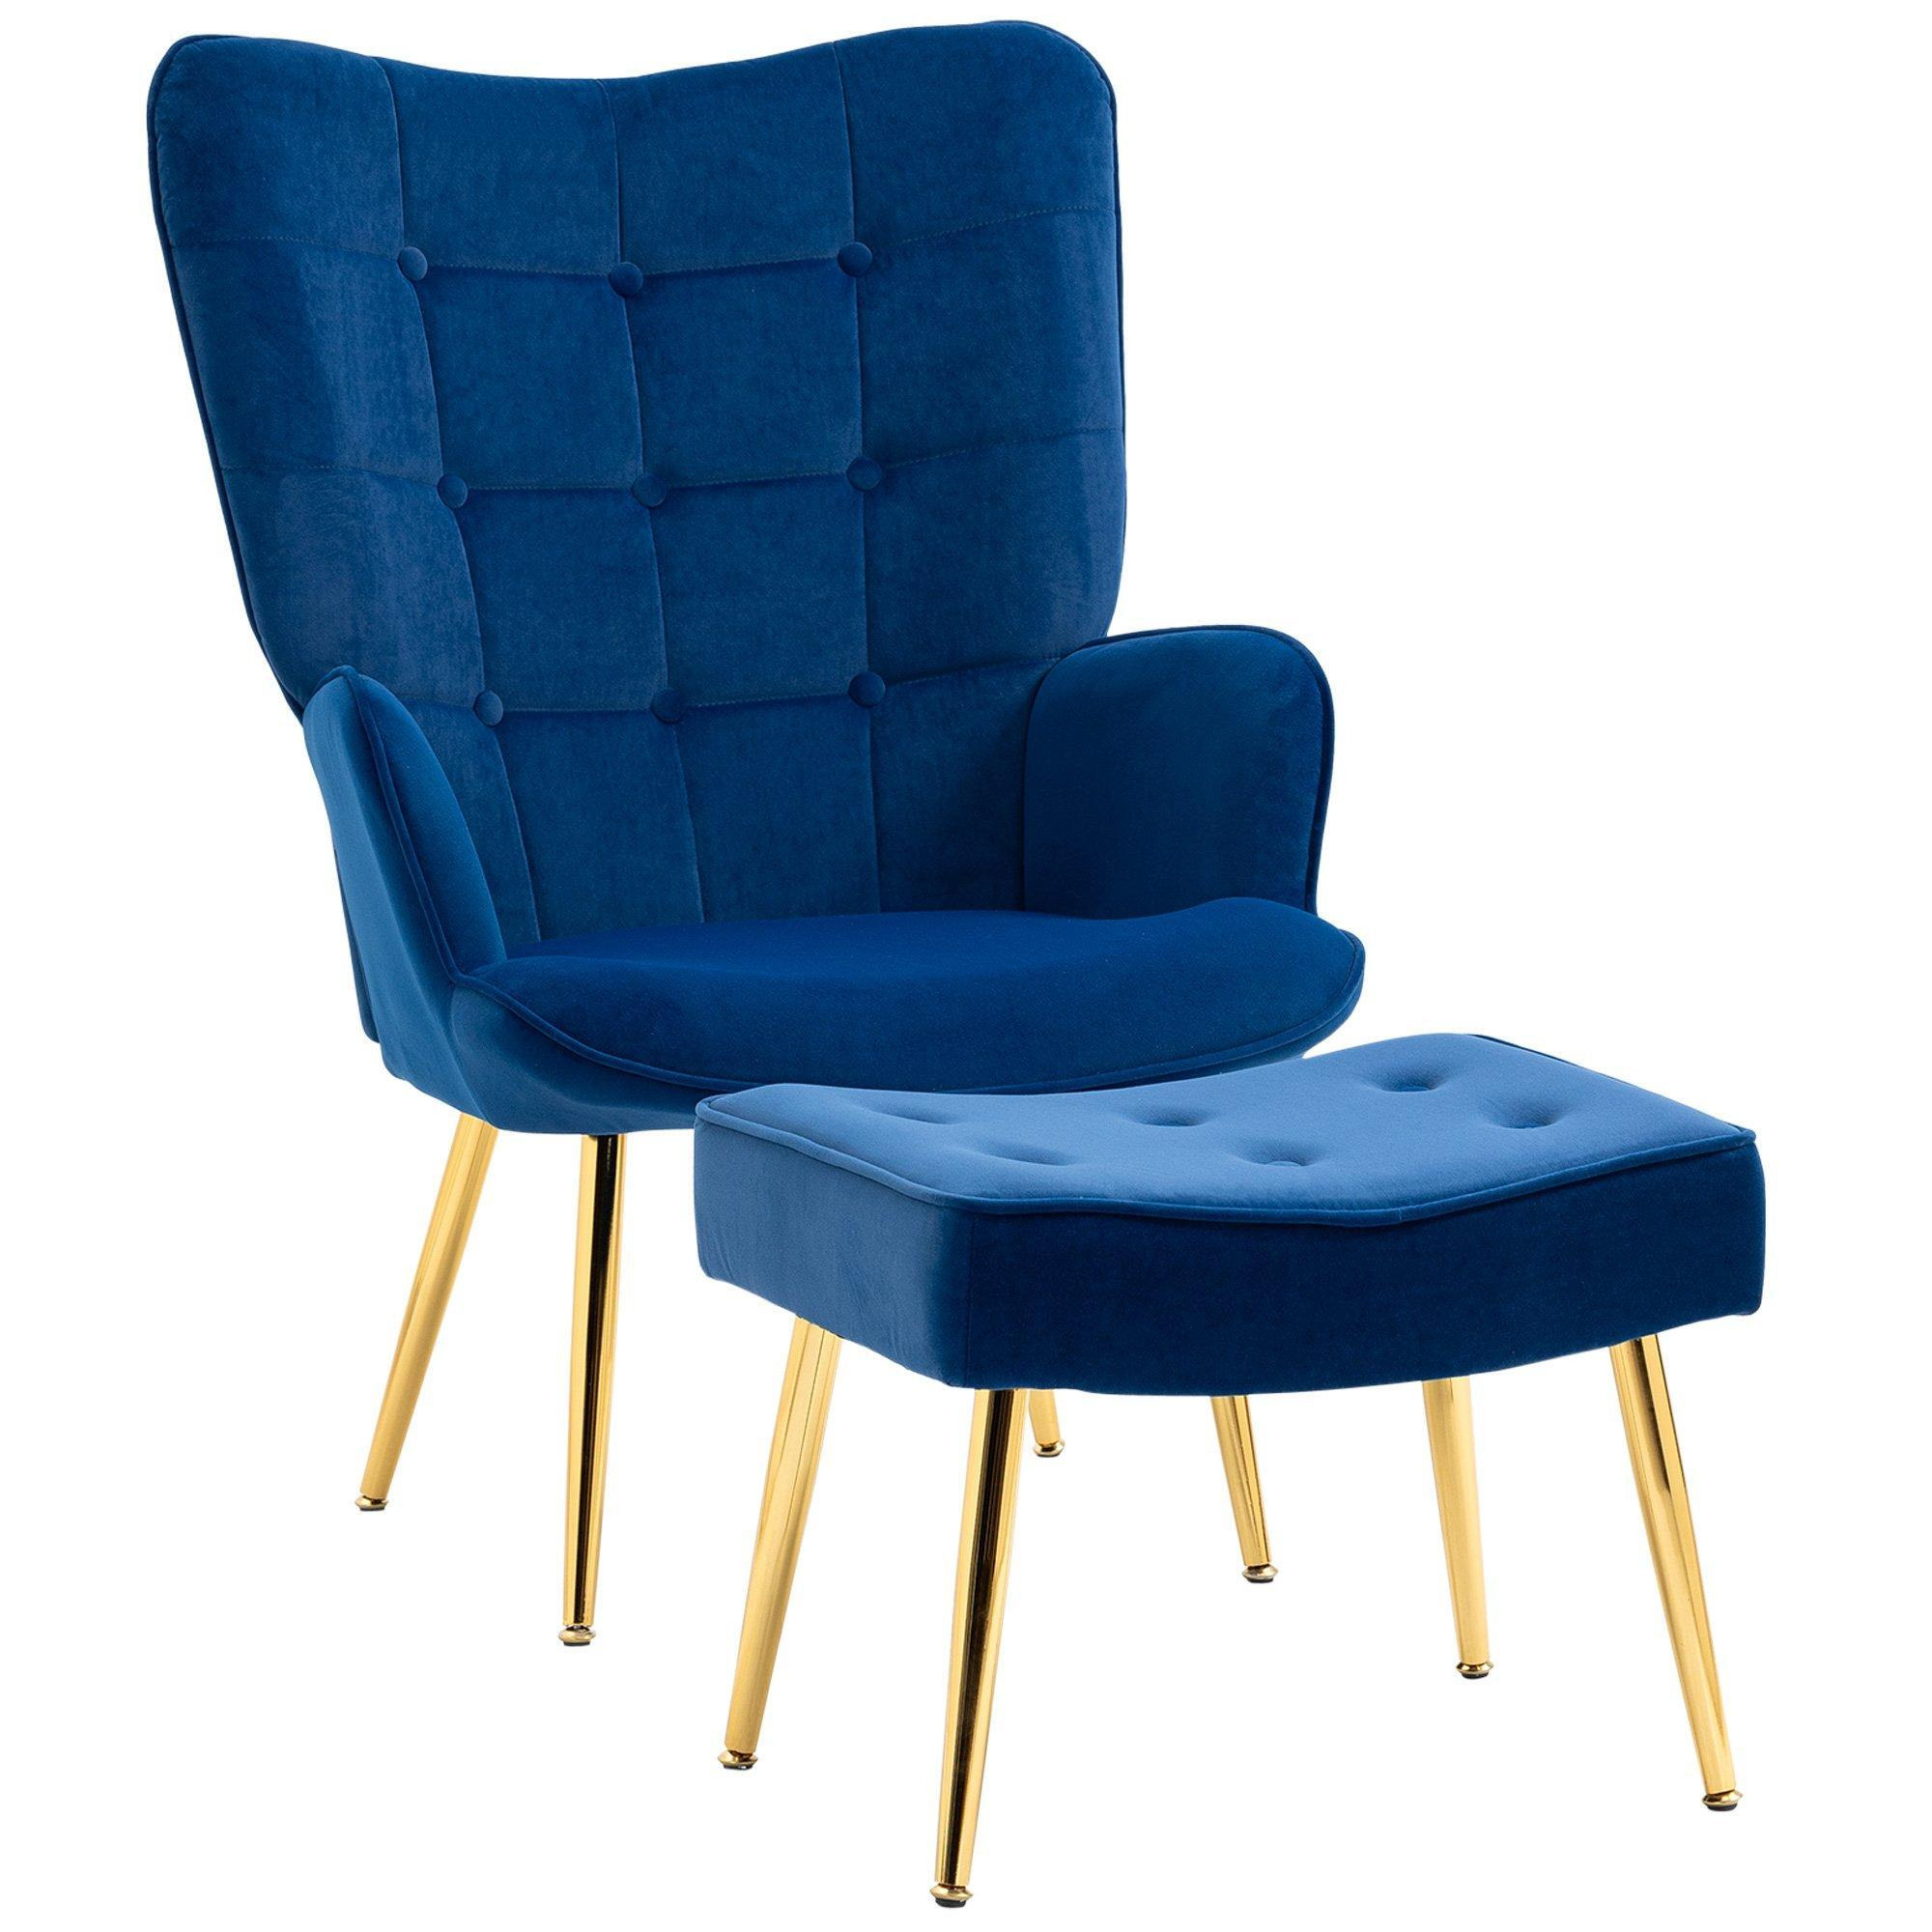 Armchair with Footstool Button Tufted Accent Chair with Steel Legs - image 1